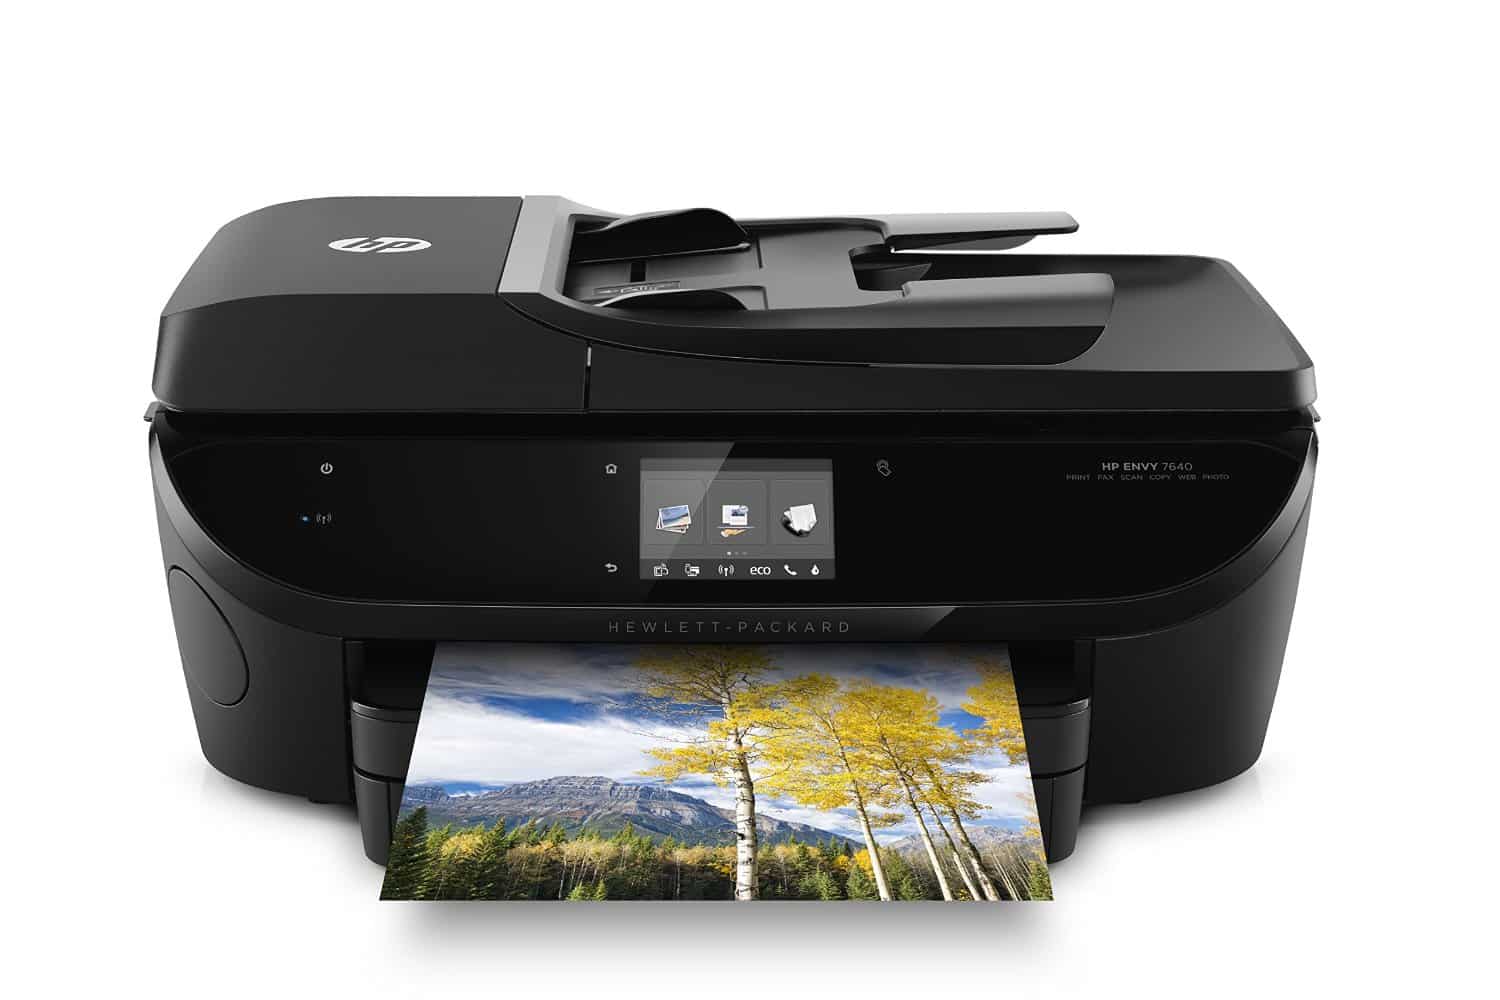 Top 10 Best AllInOne Printers for Home Use in 2018 TopTenTheBest